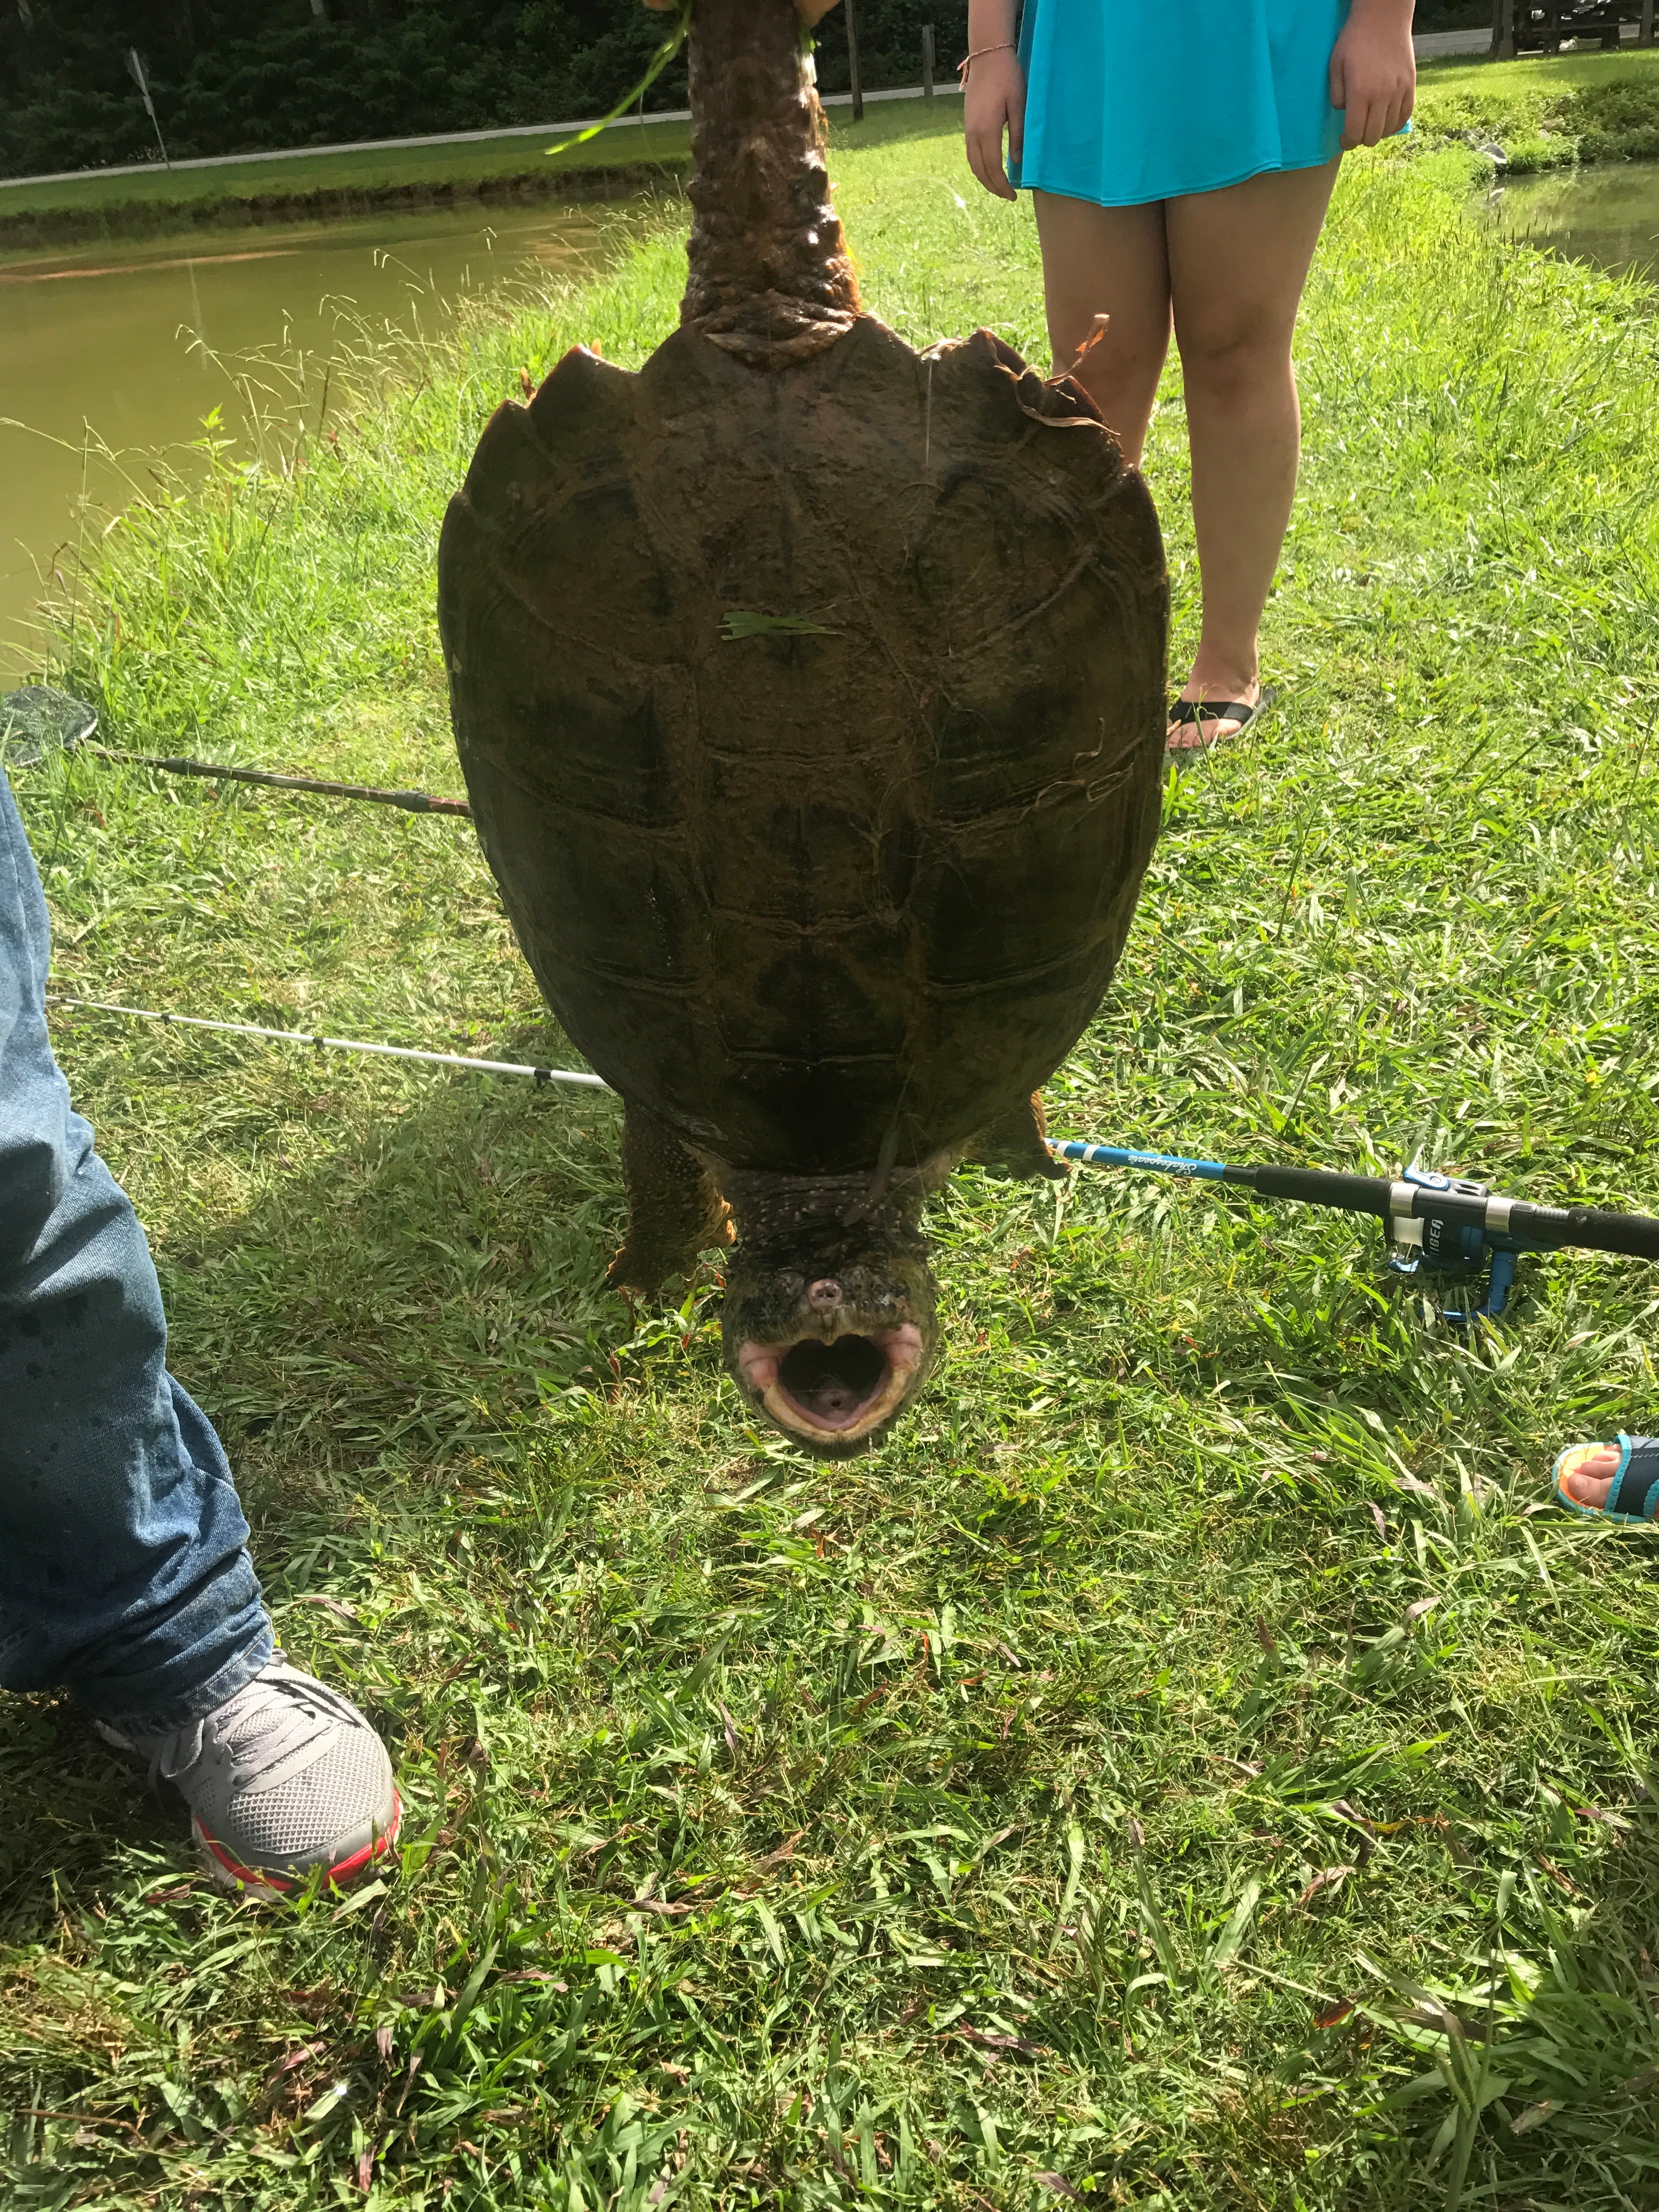 Caught a snapping turtle at the catfish pond. Threw him back though.